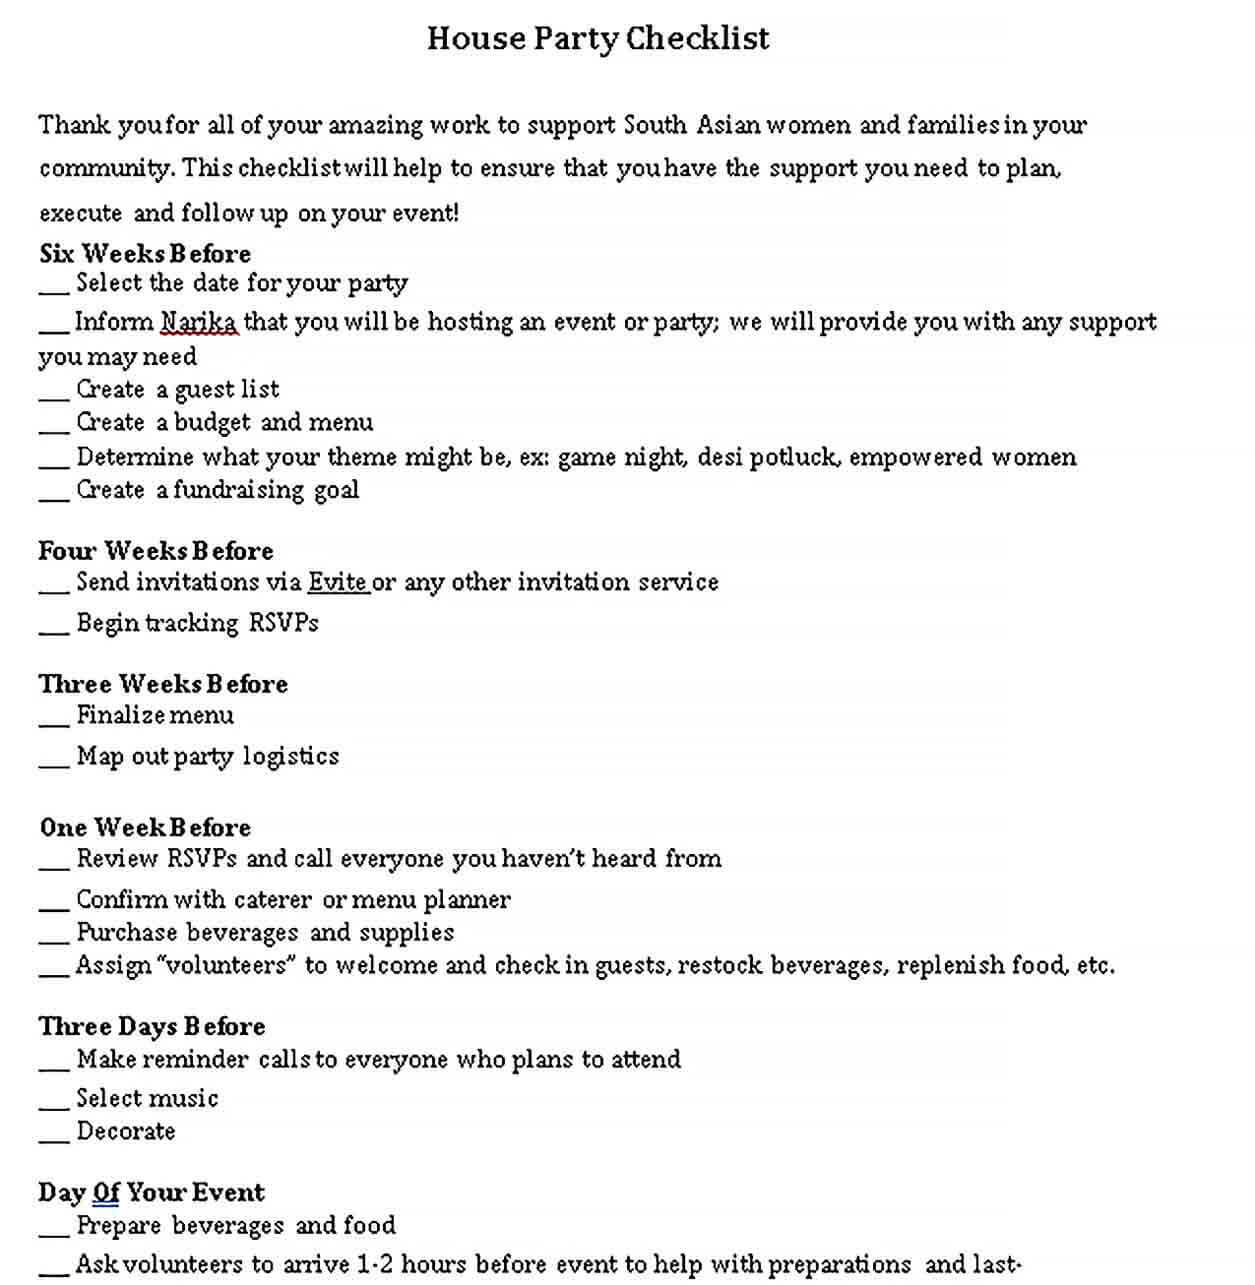 Sample House Party Checklist Template